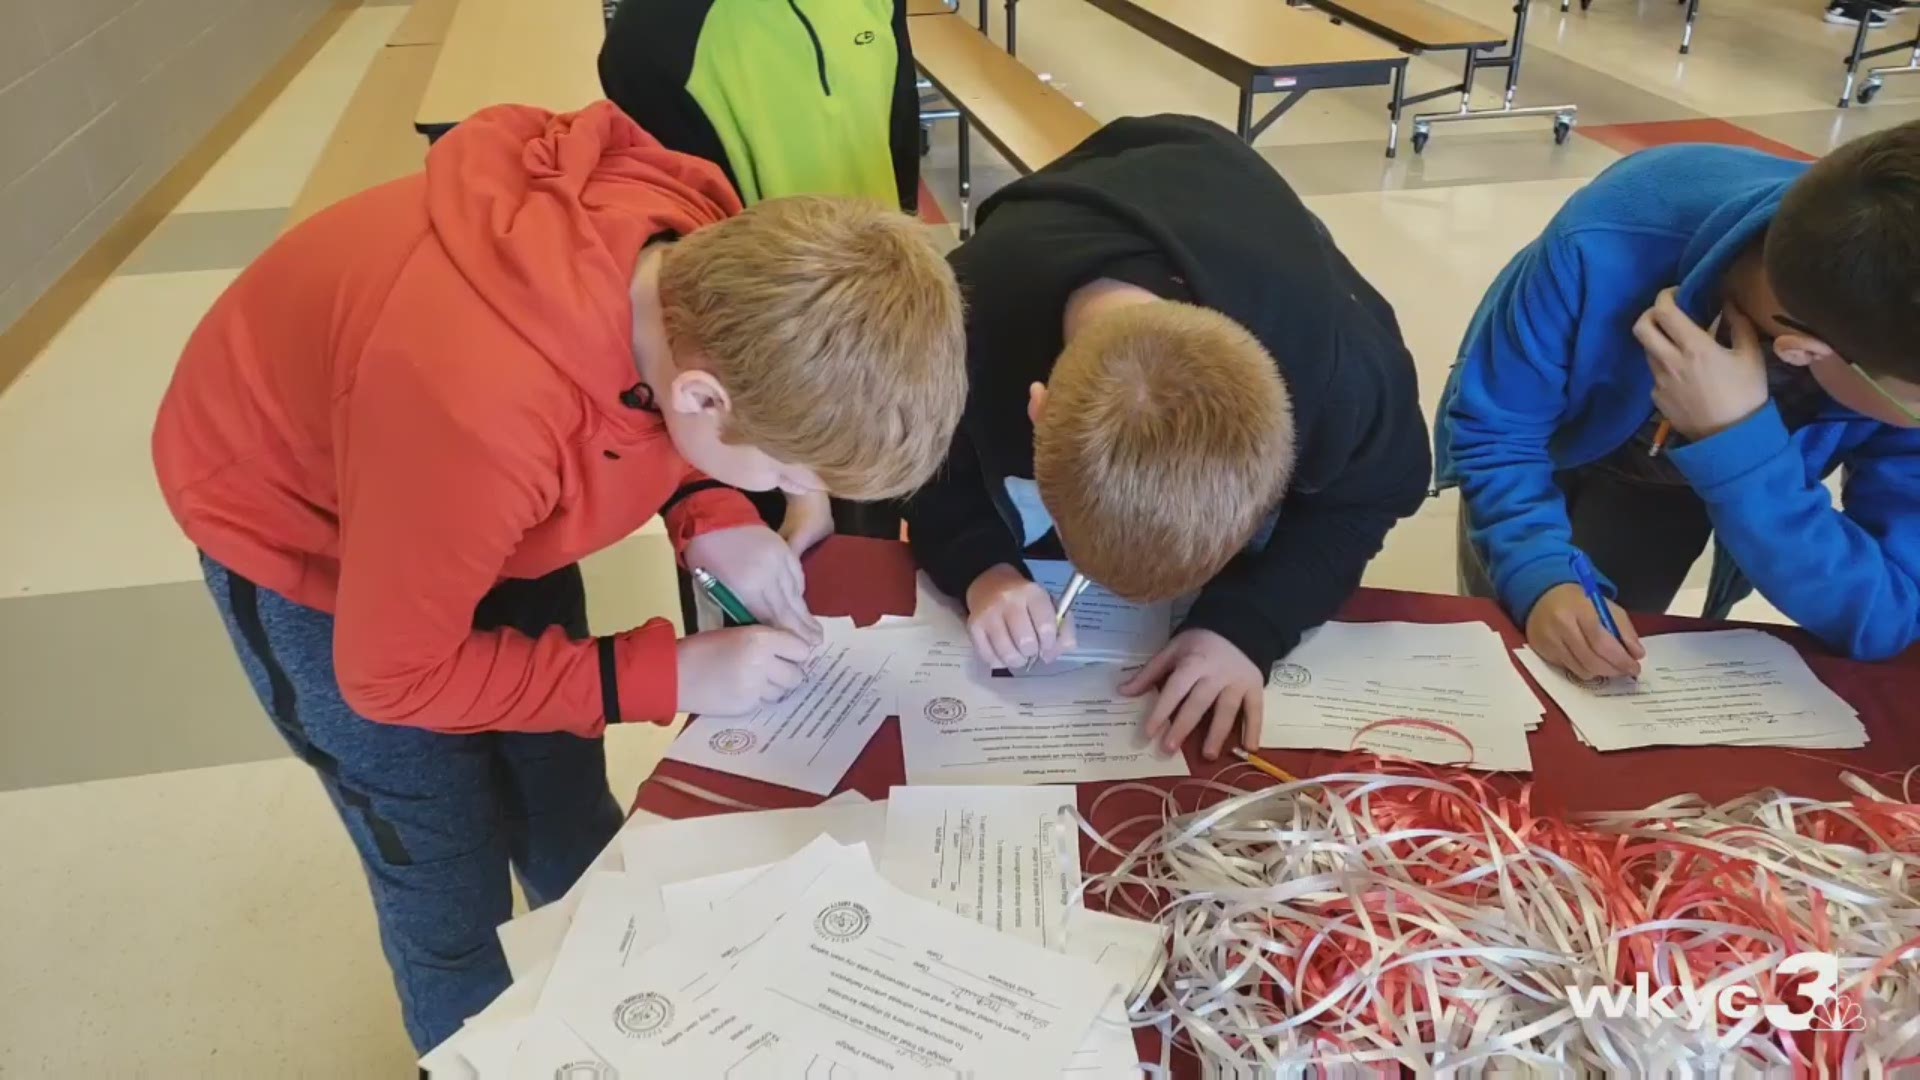 Students at Geneva Middle School are signing kindness pledges and tying ribbons to a fence outside as a symbol of that pledge. This event is occurring as part of National Bullying Prevention Month.